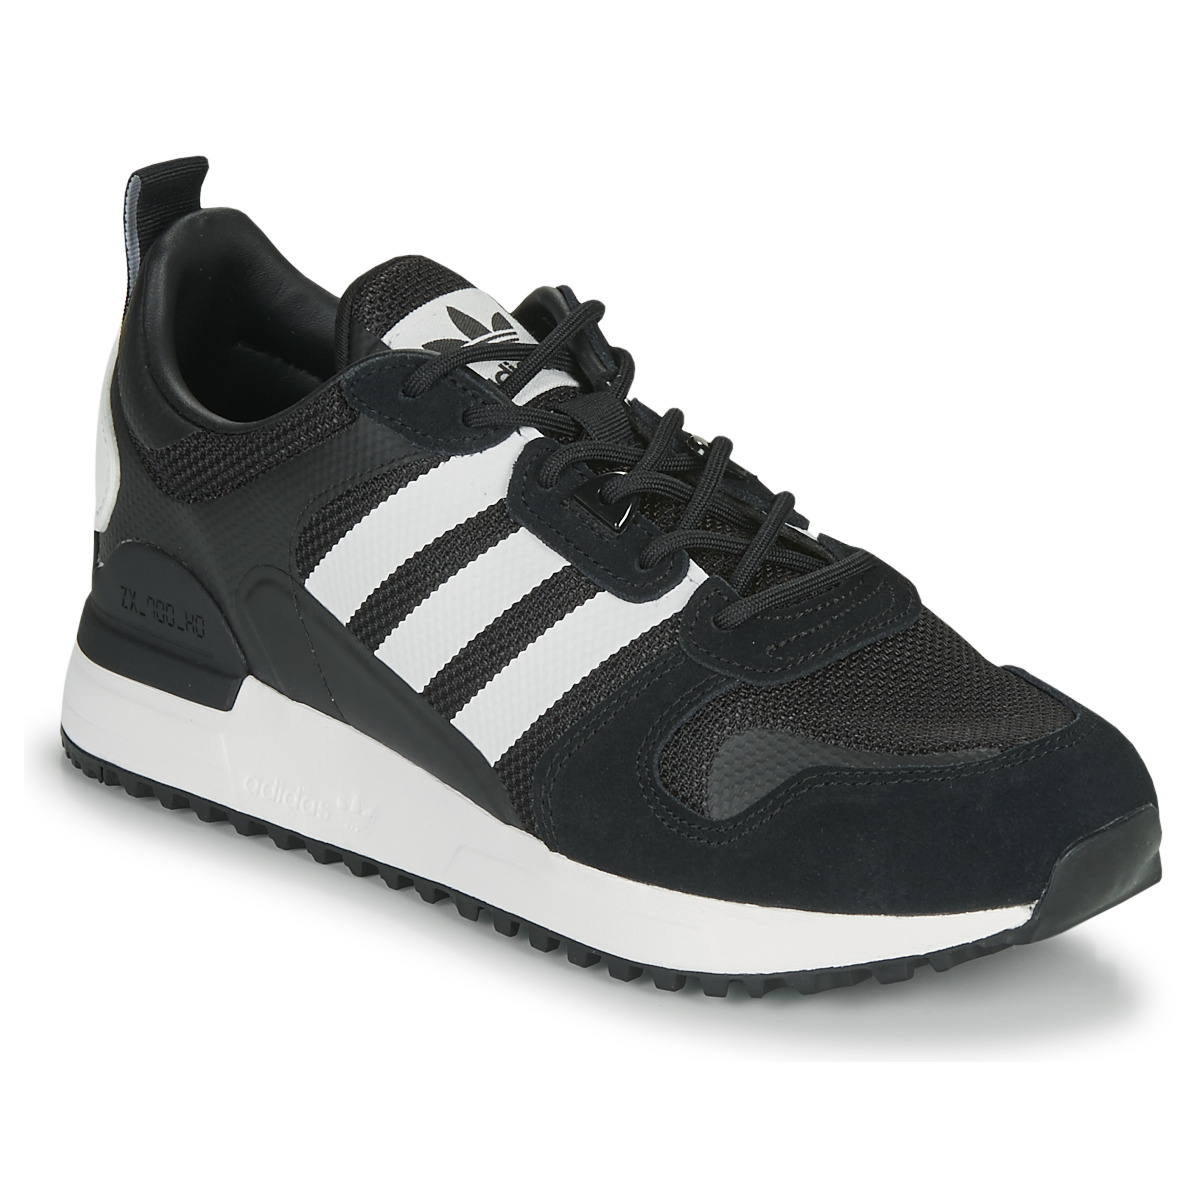 Regan liar bunker adidas Originals ZX 700 HD Black / White - Fast delivery | Spartoo Europe !  - Shoes Low top trainers 88,00 €